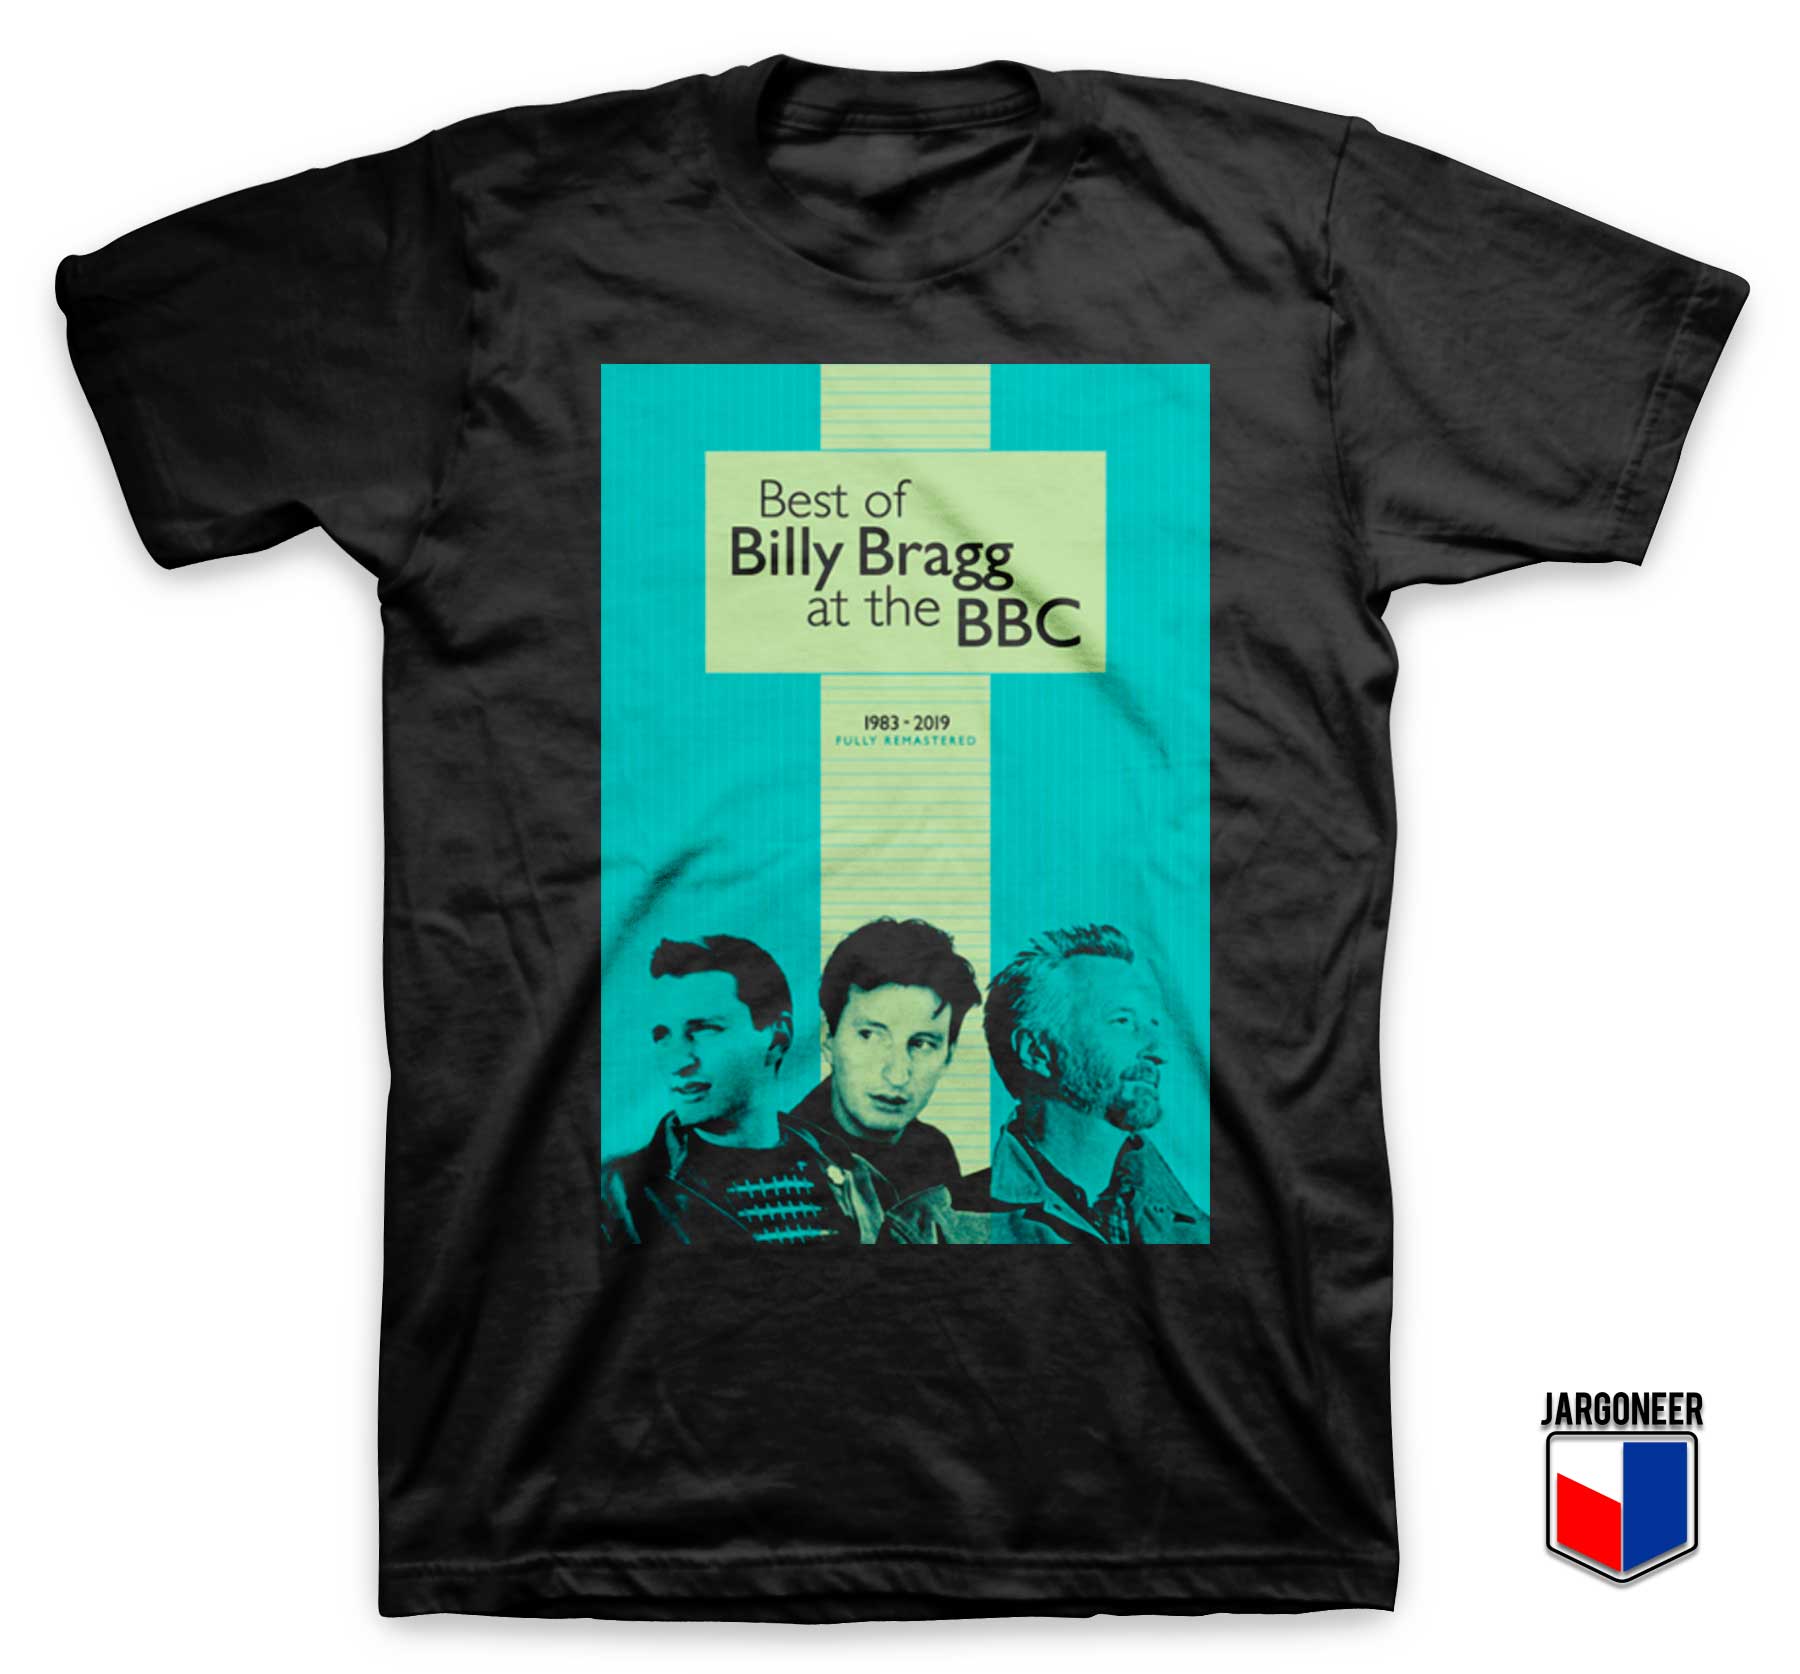 The Best of Billy Bragg at the BBC T Shirt - Shop Unique Graphic Cool Shirt Designs